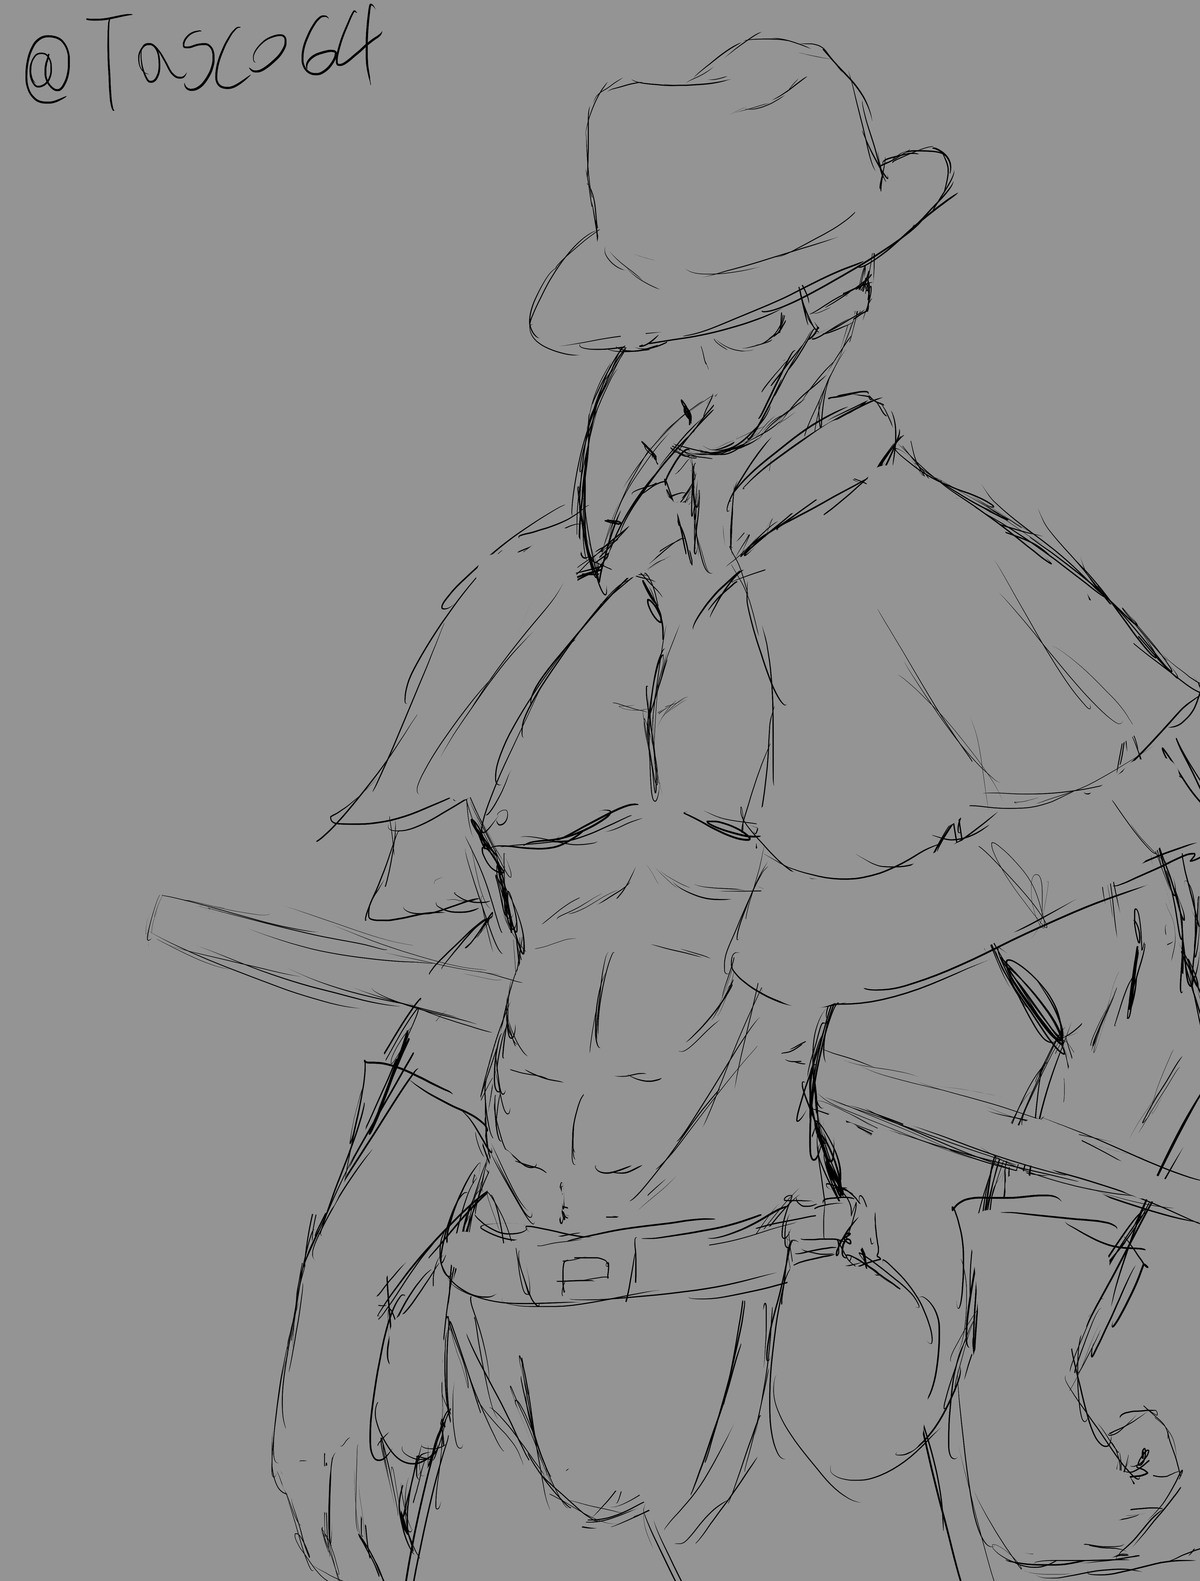 DailyDrawing day 208. Sexy Plague doctor. my boy clayishcactus told me to draw a sexy plague doctor. i think i may have misunderstood the request join list: Sup